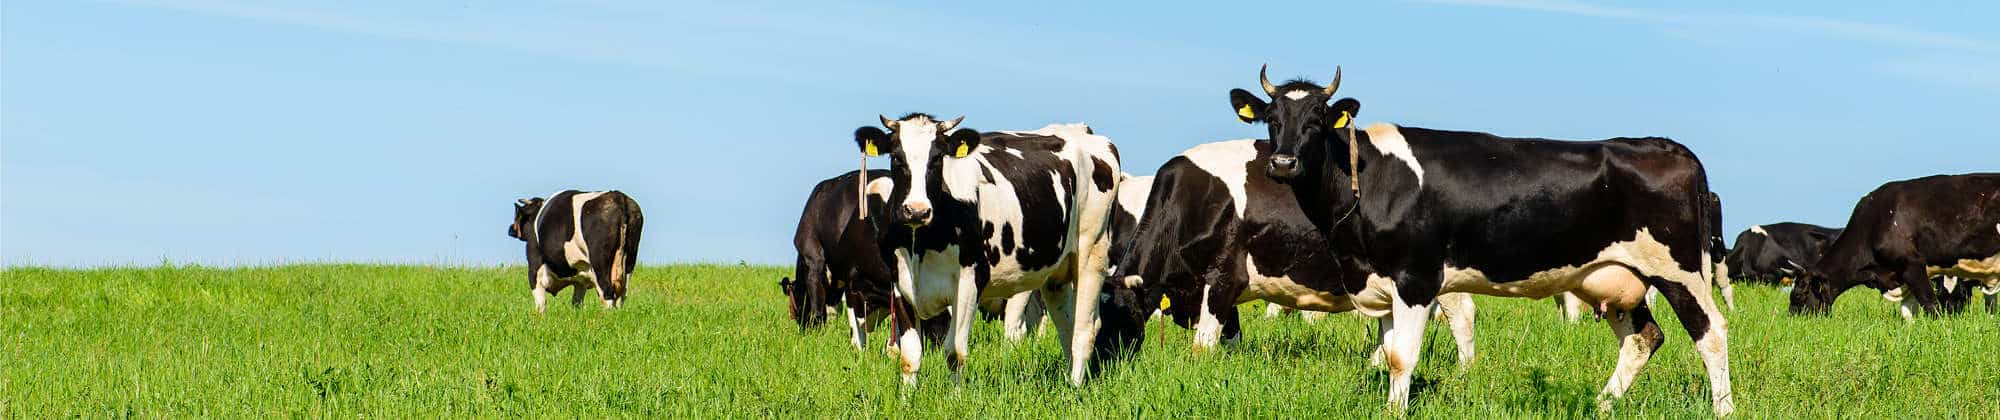 sanitation standards for dairy farms